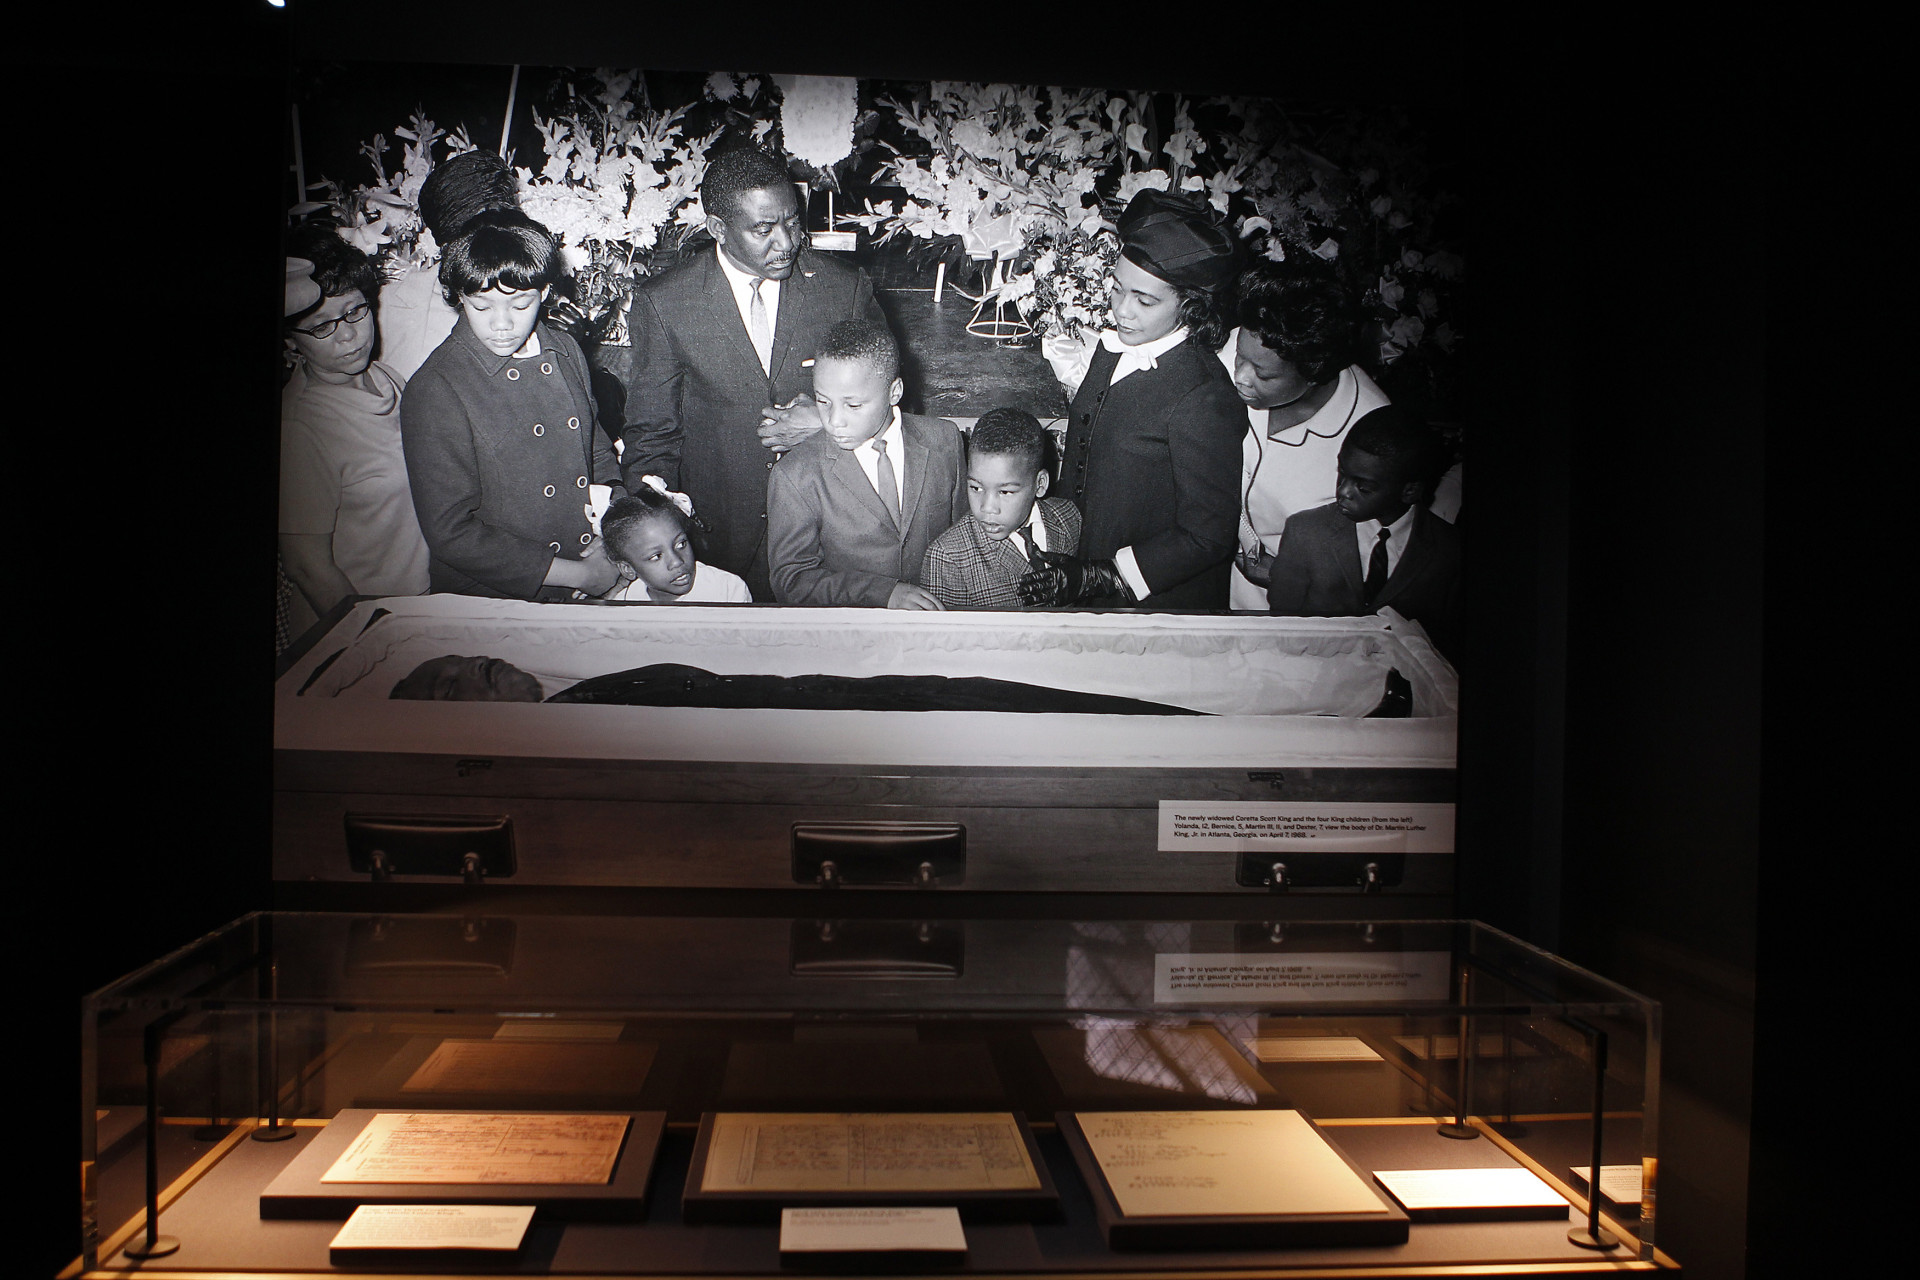 Exhibits trace the history of the Civil Rights Movement in the United States from the 17th century to the present.<p><a href="https://www.msn.com/en-us/community/channel/vid-7xx8mnucu55yw63we9va2gwr7uihbxwc68fxqp25x6tg4ftibpra?cvid=94631541bc0f4f89bfd59158d696ad7e">Follow us and access great exclusive content every day</a></p>